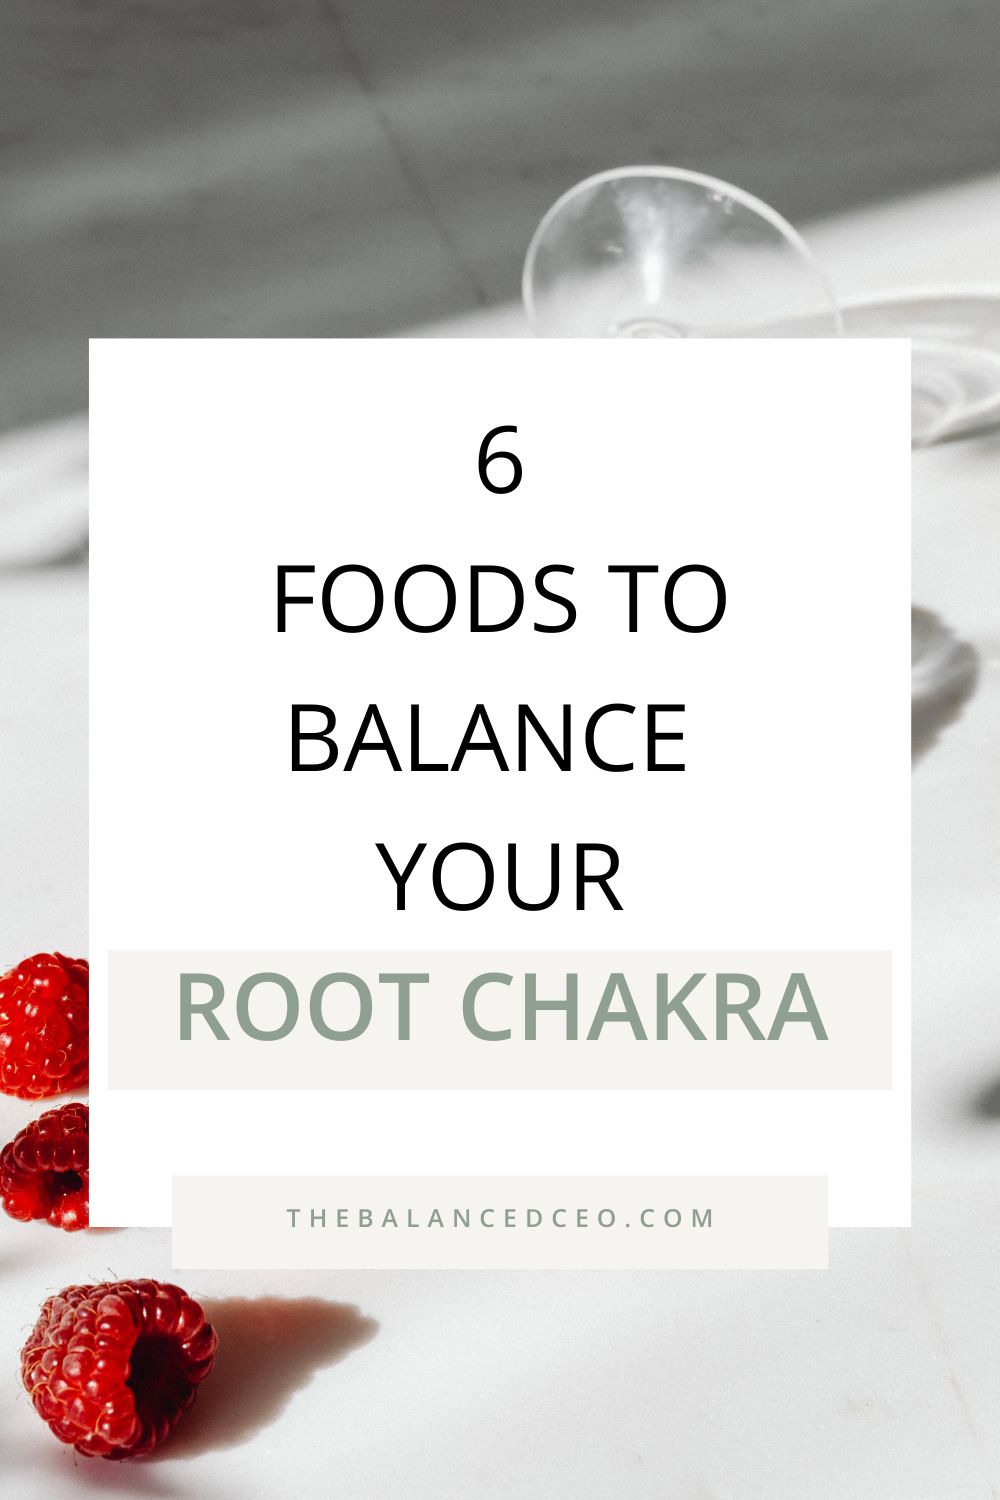 6 Foods to Balance Your Root Chakra